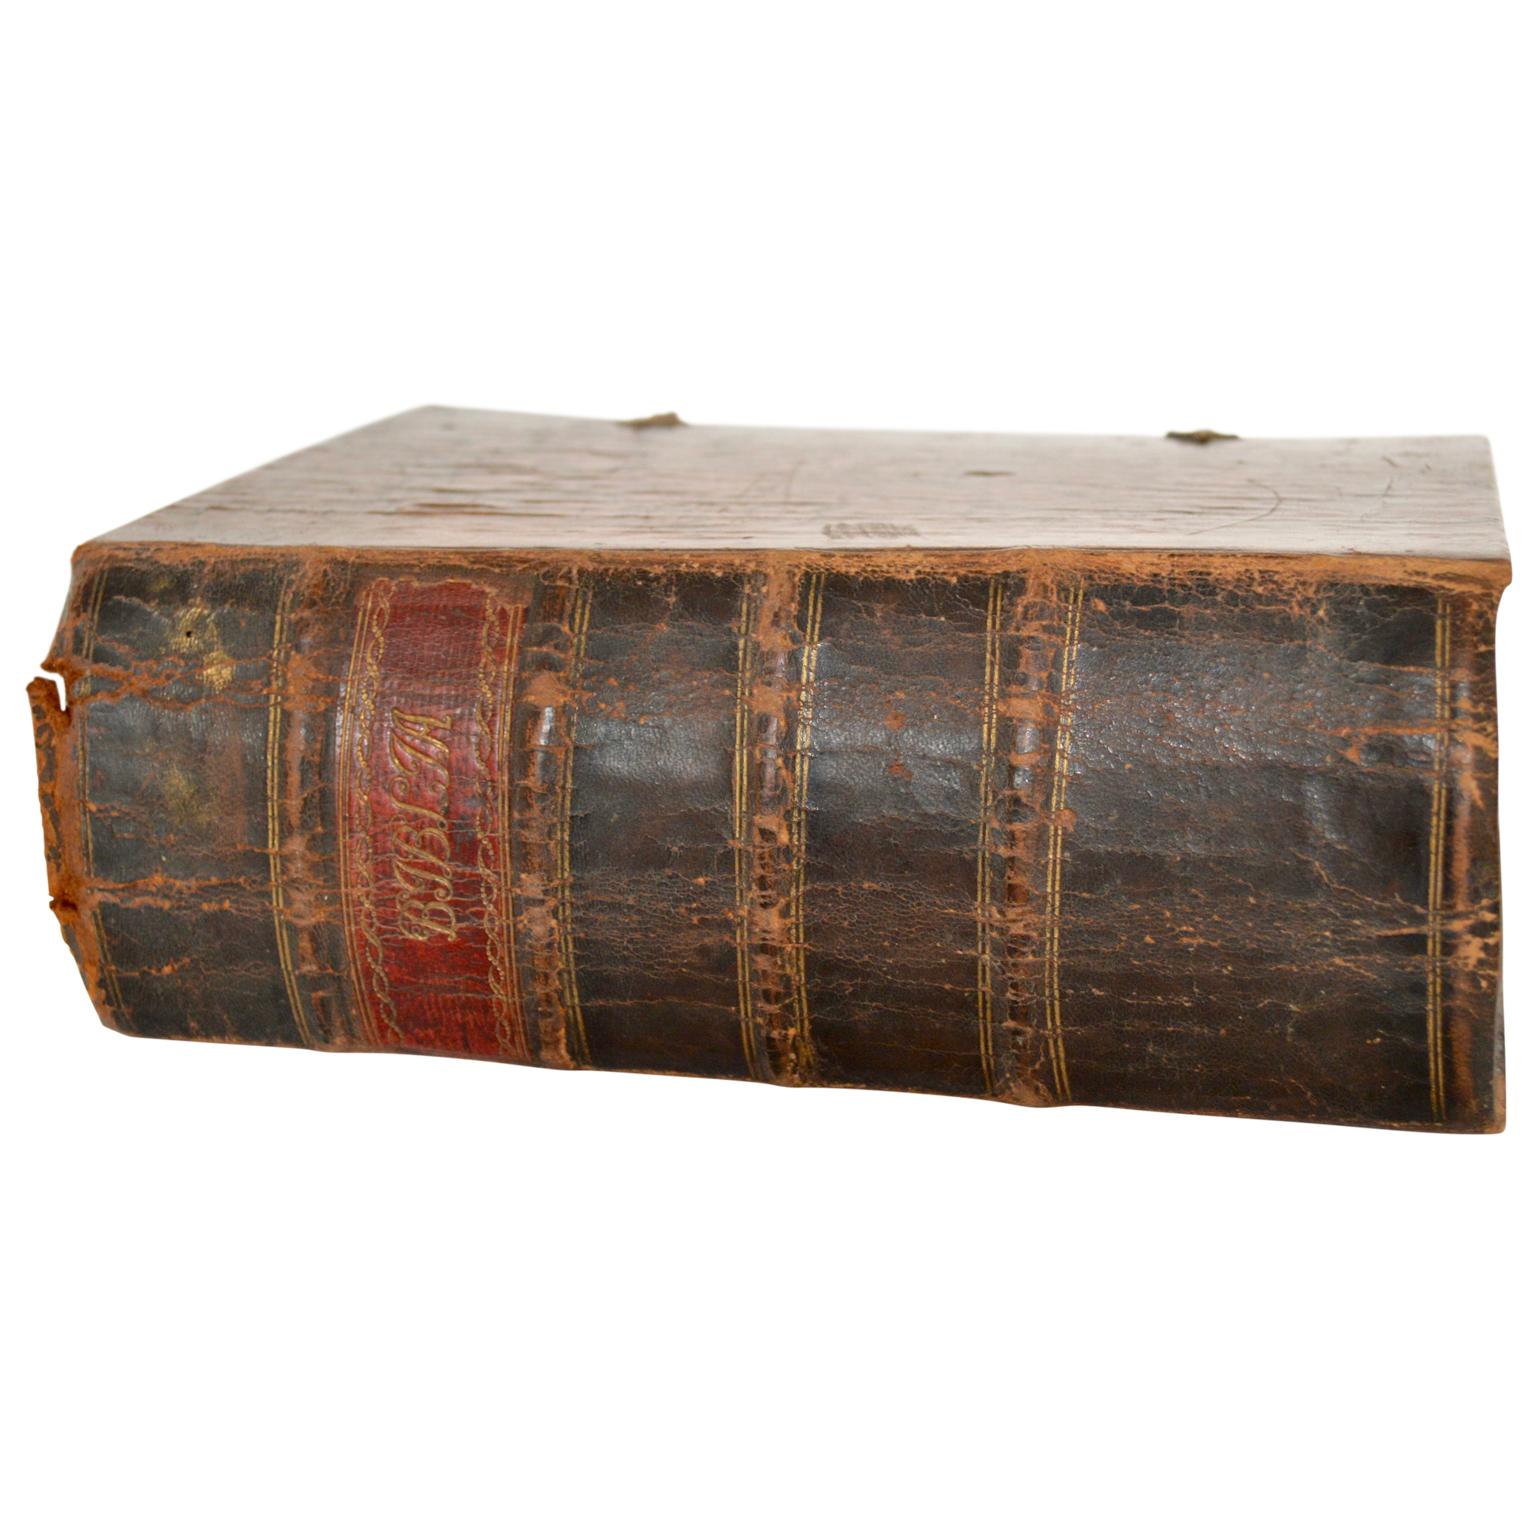 Danish leather-bound Bible, with brass brackets. Editors Huus and Reyse anno, 1699.